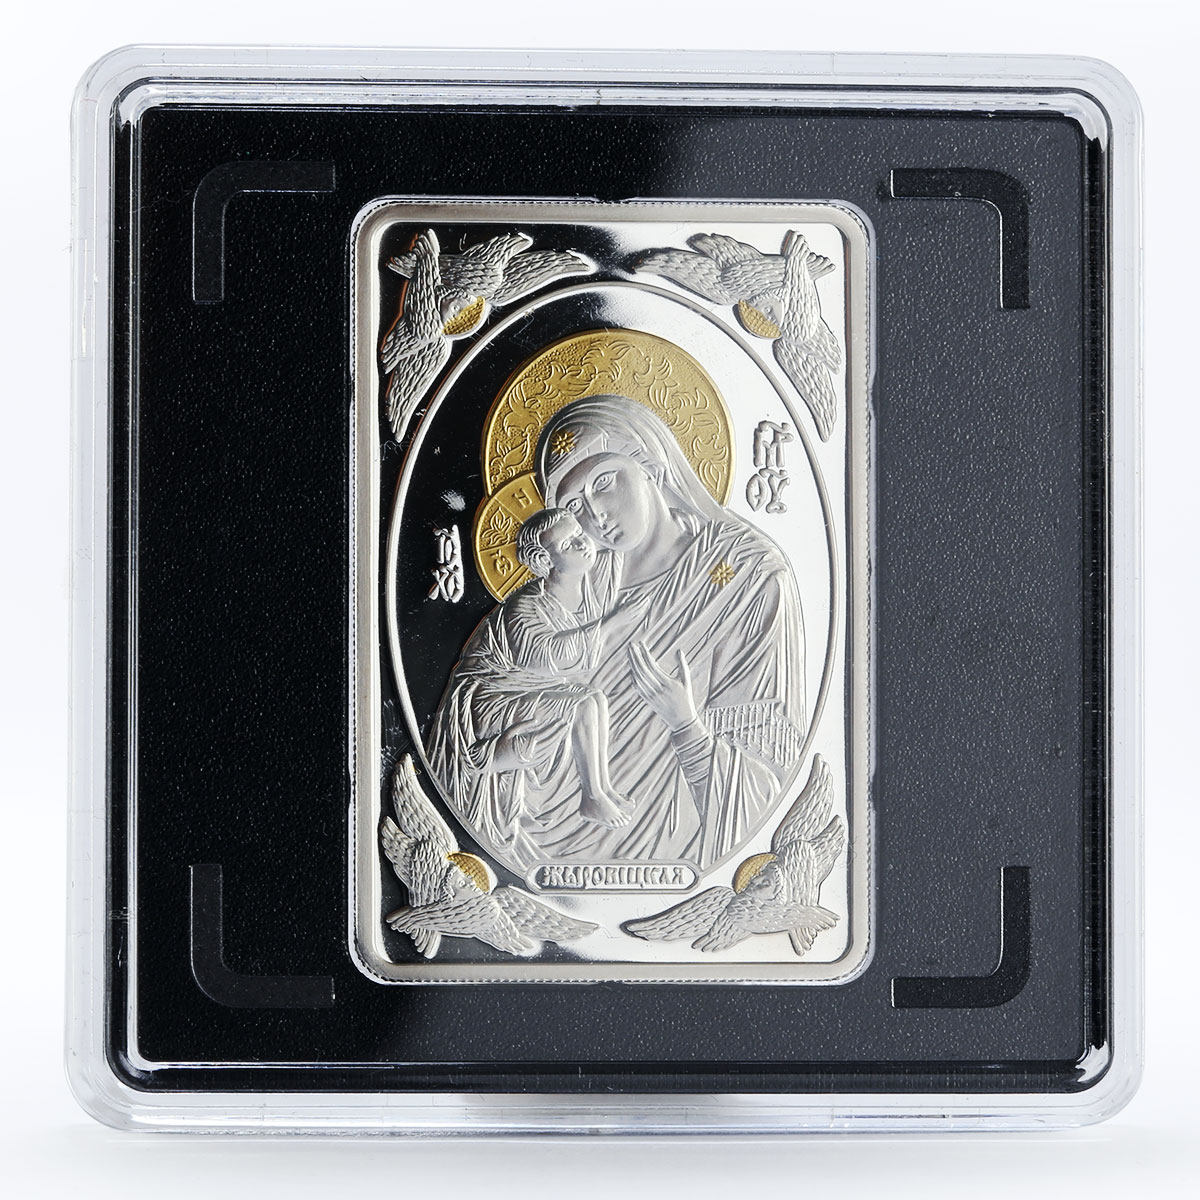 Belarus 20 rubles Icon of Most Holy Theotokos gilded silver coin 2011